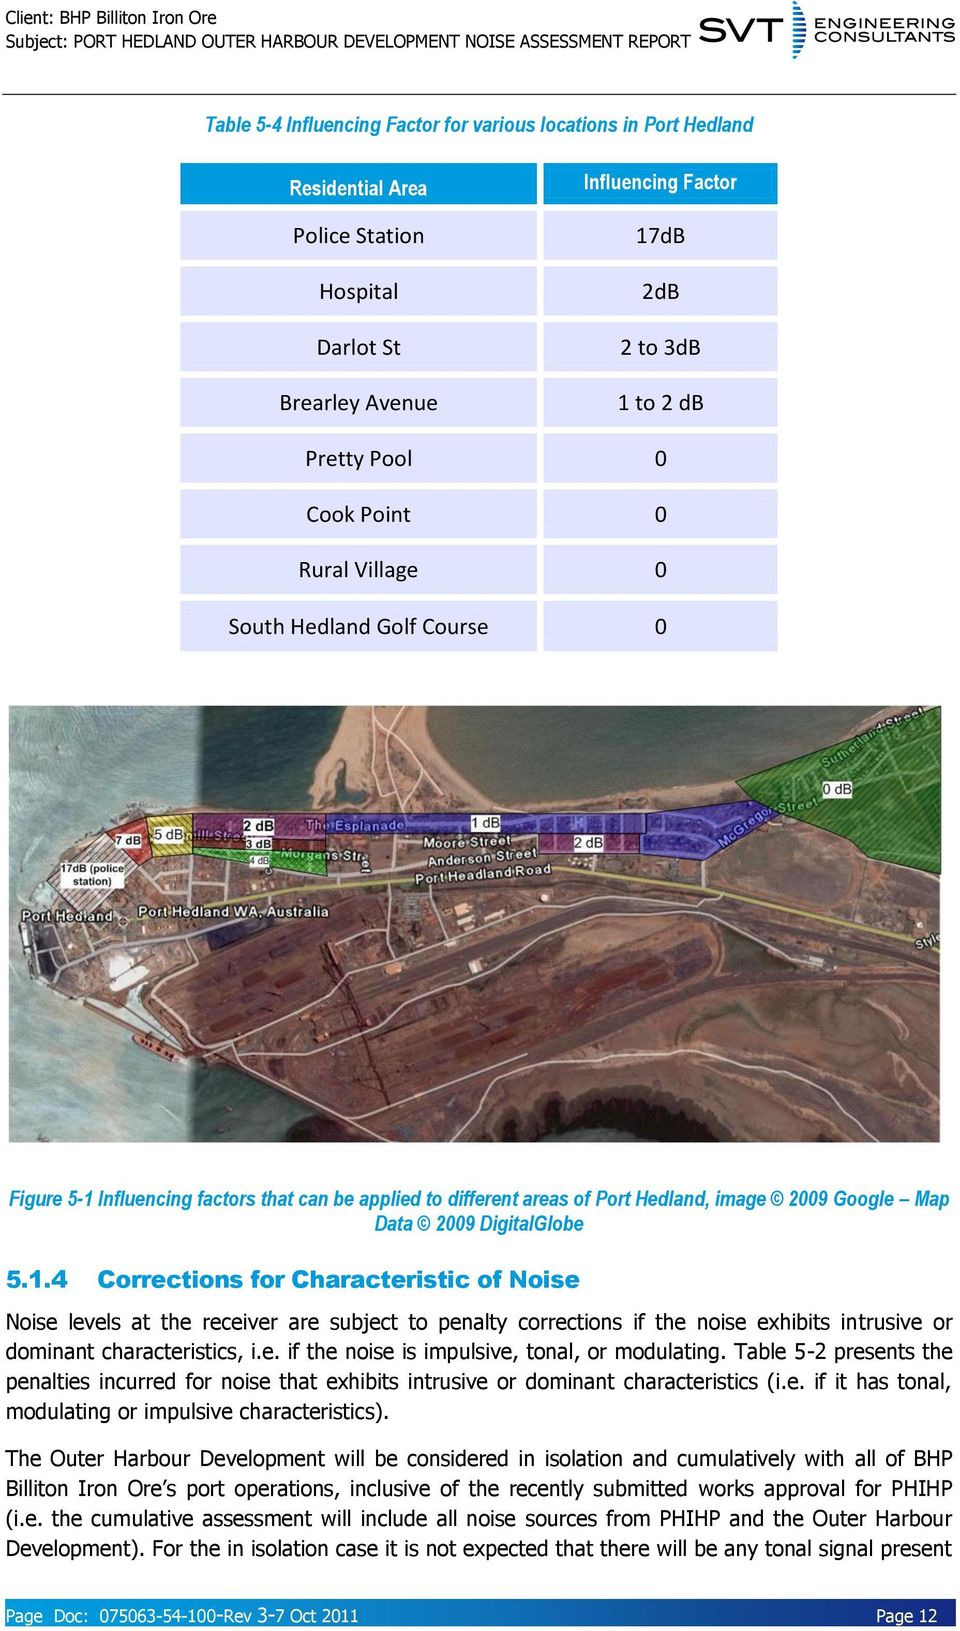 Influencing factors that can be applied to different areas of Port Hedland, image 2009 Google Map Data 2009 DigitalGlobe 5.1.